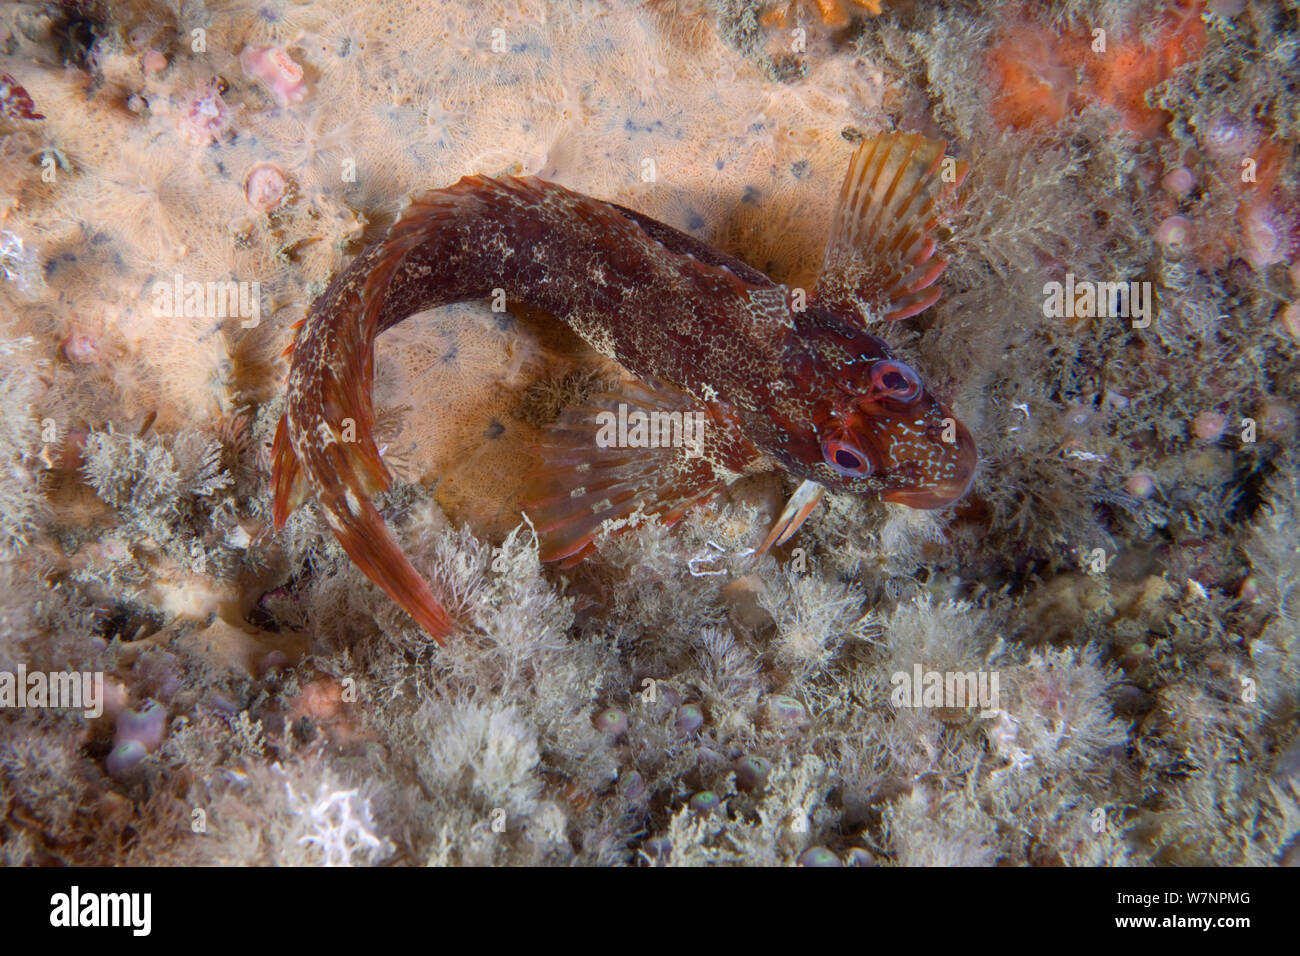 Tompot Blenny (Parablennius gattorugine) English Channel, off the coast of Sark, Channel Islands, July Stock Photo